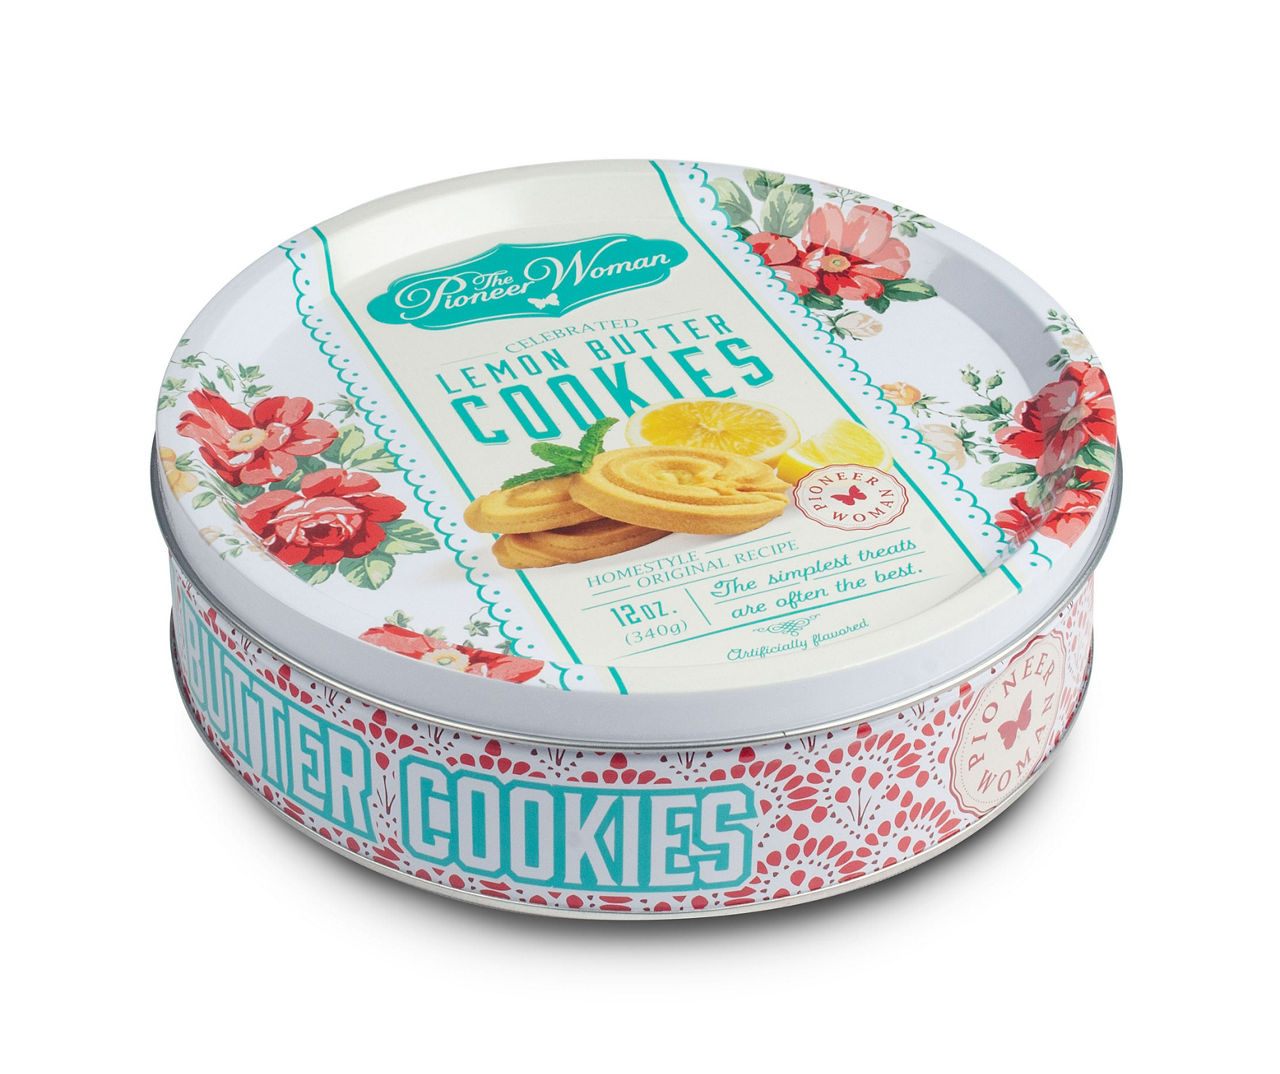 Butter Cookies in a Tin Box